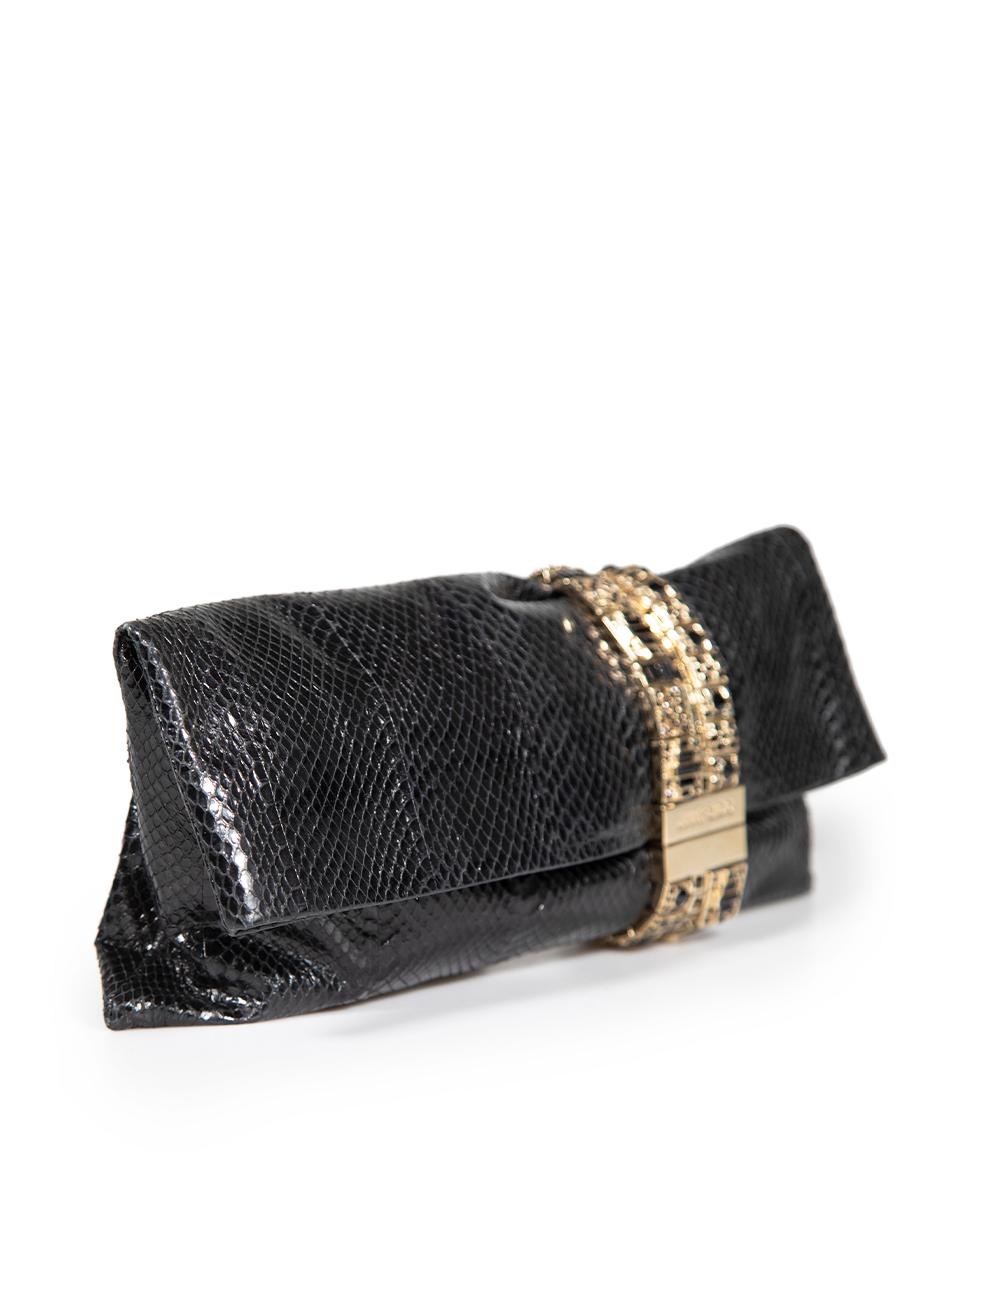 CONDITION is Very good. Minimal wear to bag is evident. Minimal wear to the rear with a peeling scale and there are light scratches to the metal hardware on this used Jimmy Choo designer resale item.
 
 
 
 Details
 
 
 Black
 
 Snakeskin
 
 Medium